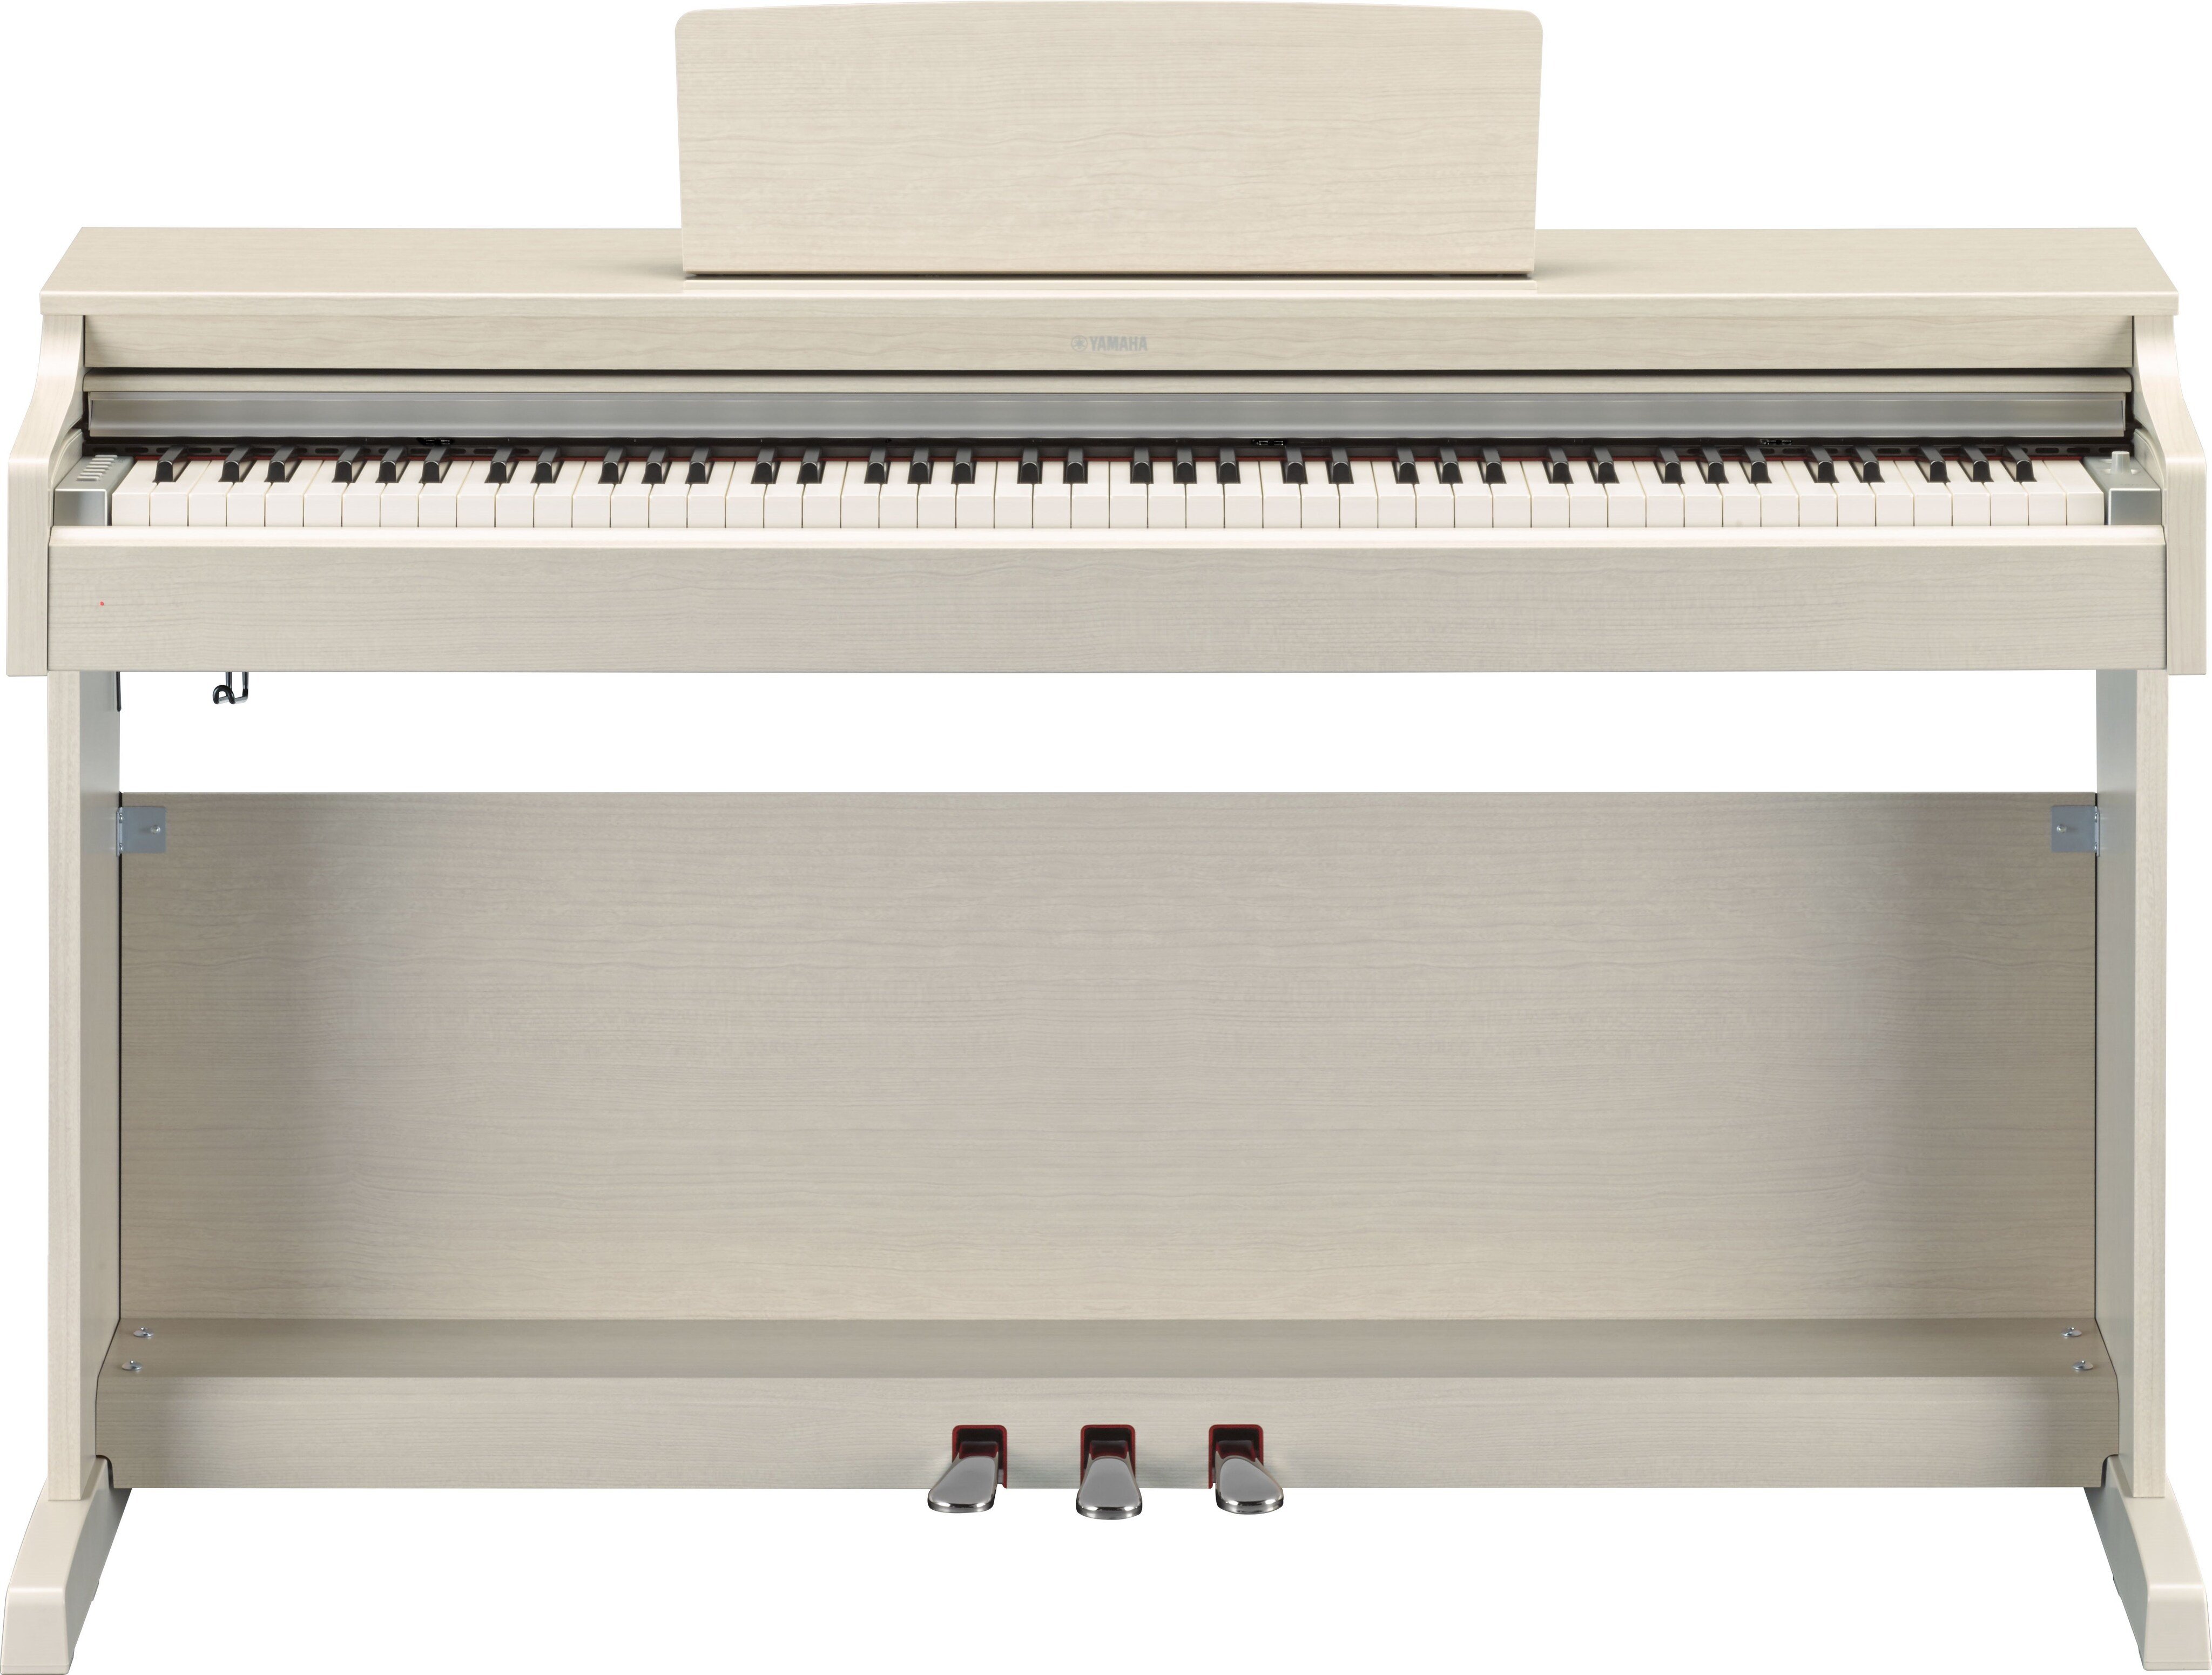 YDP-163 - Overview - ARIUS - Pianos - Musical Instruments 